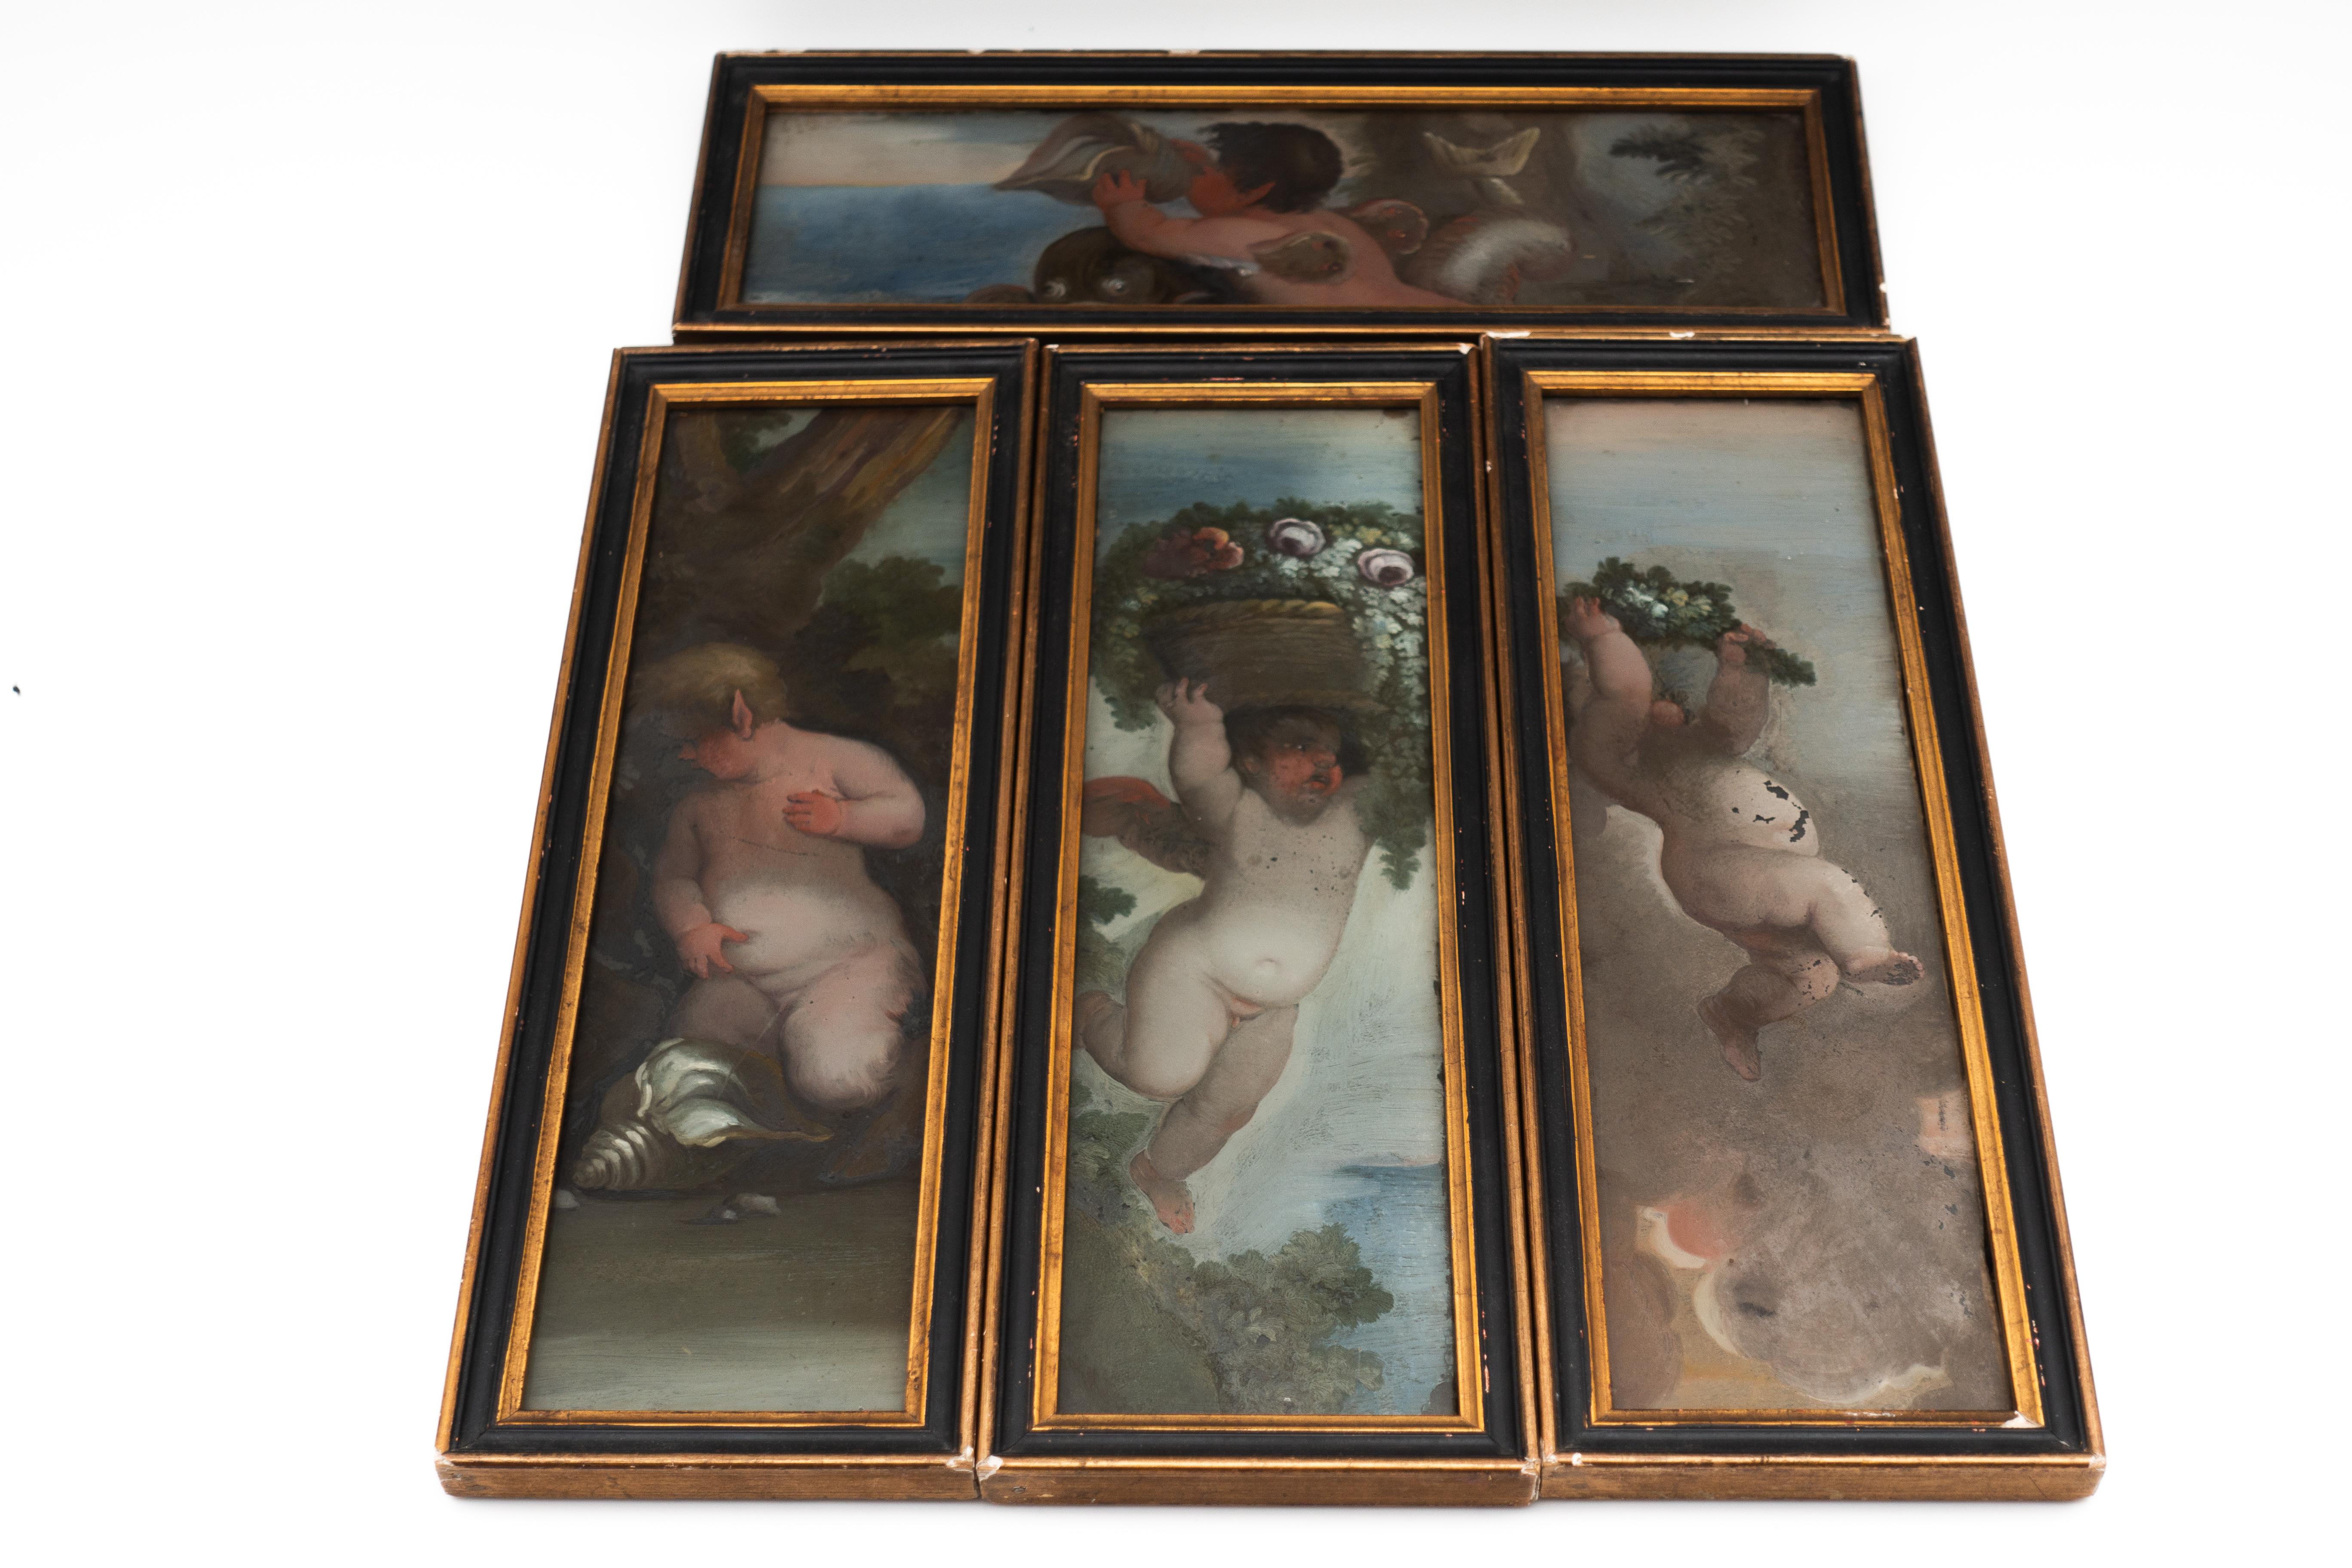 Set of four Renaissance-inspired églomisé painted panels. Verre églomisé, or back painting technique, consists of applying gold leaf to a glass substrate (plate, cup or any other object that can be decorated) using an oil-based adhesive. The gold